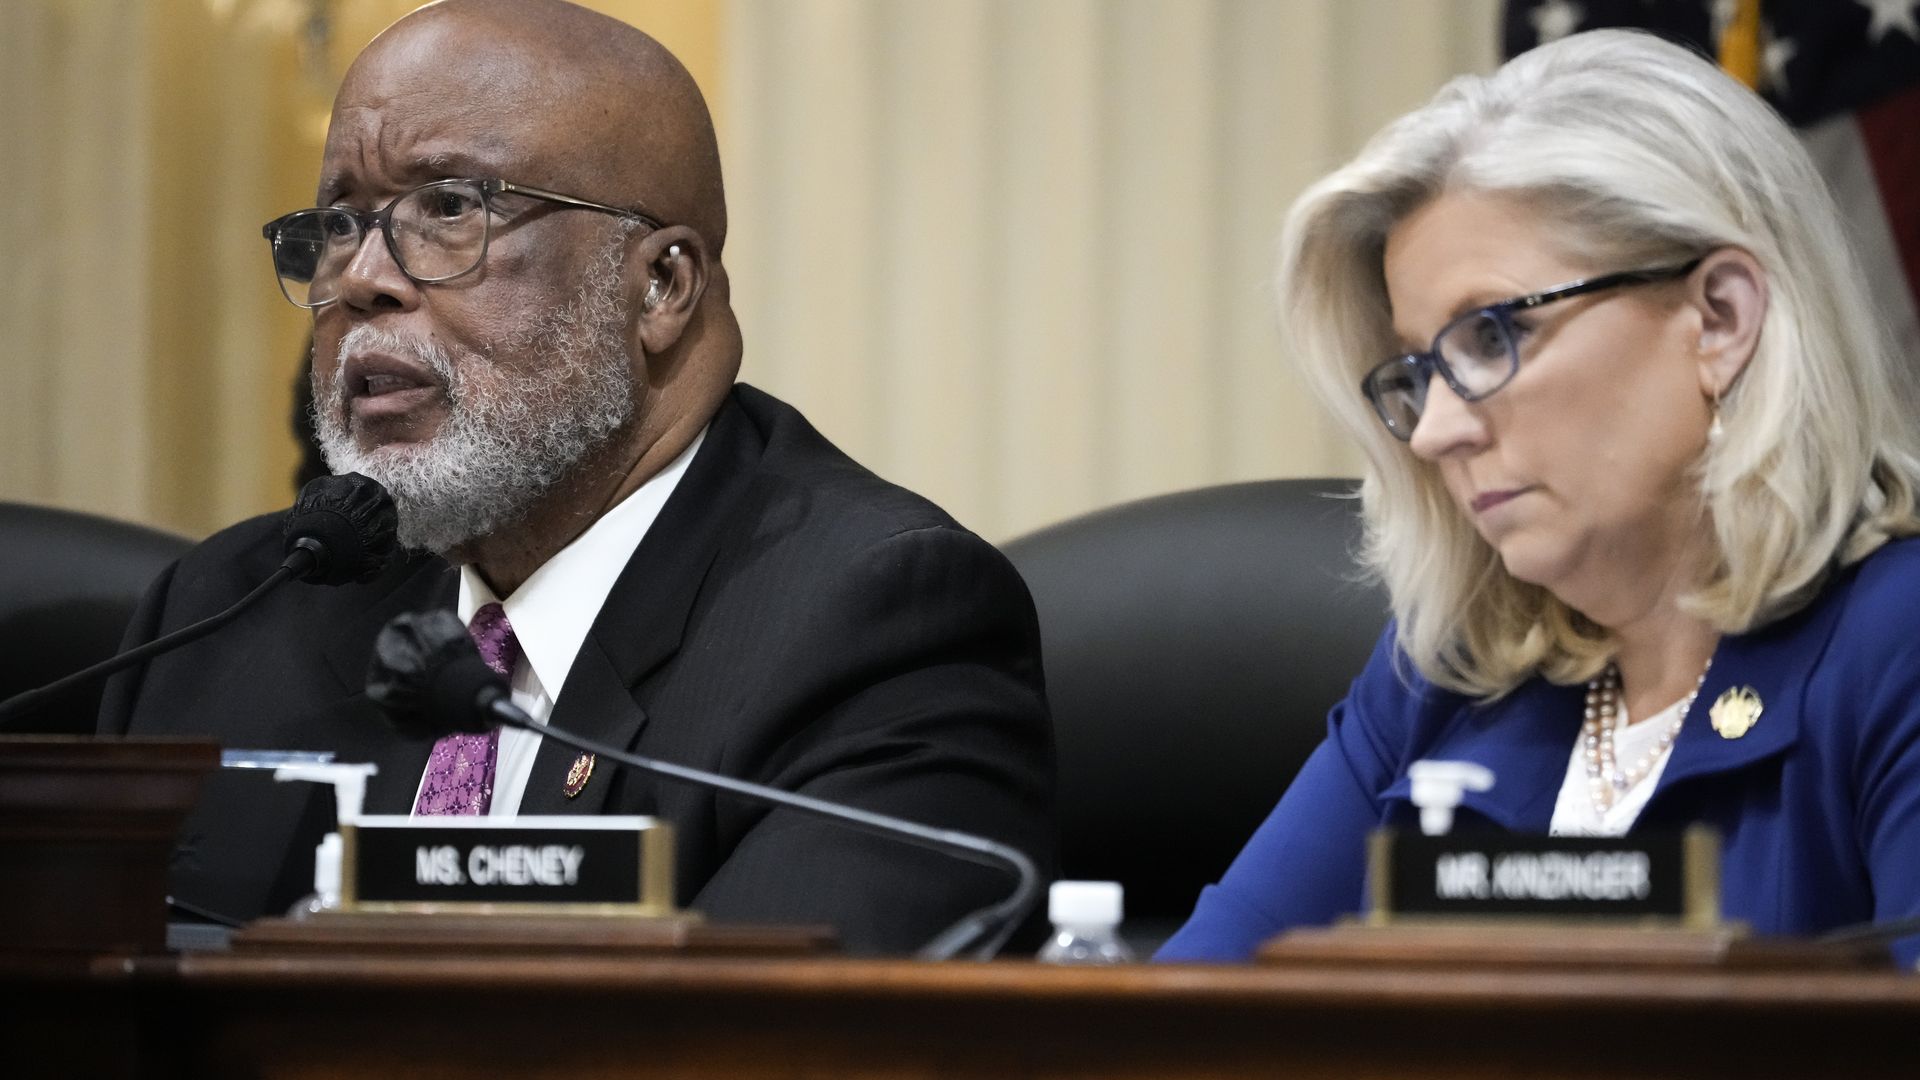 Reps. Bennie Thompson, wearing a gray suit, white shirt and red tie, and Liz Cheney, wearing a blue suit, white shirt and pearl necklace, at a Jan. 6 committee hearing